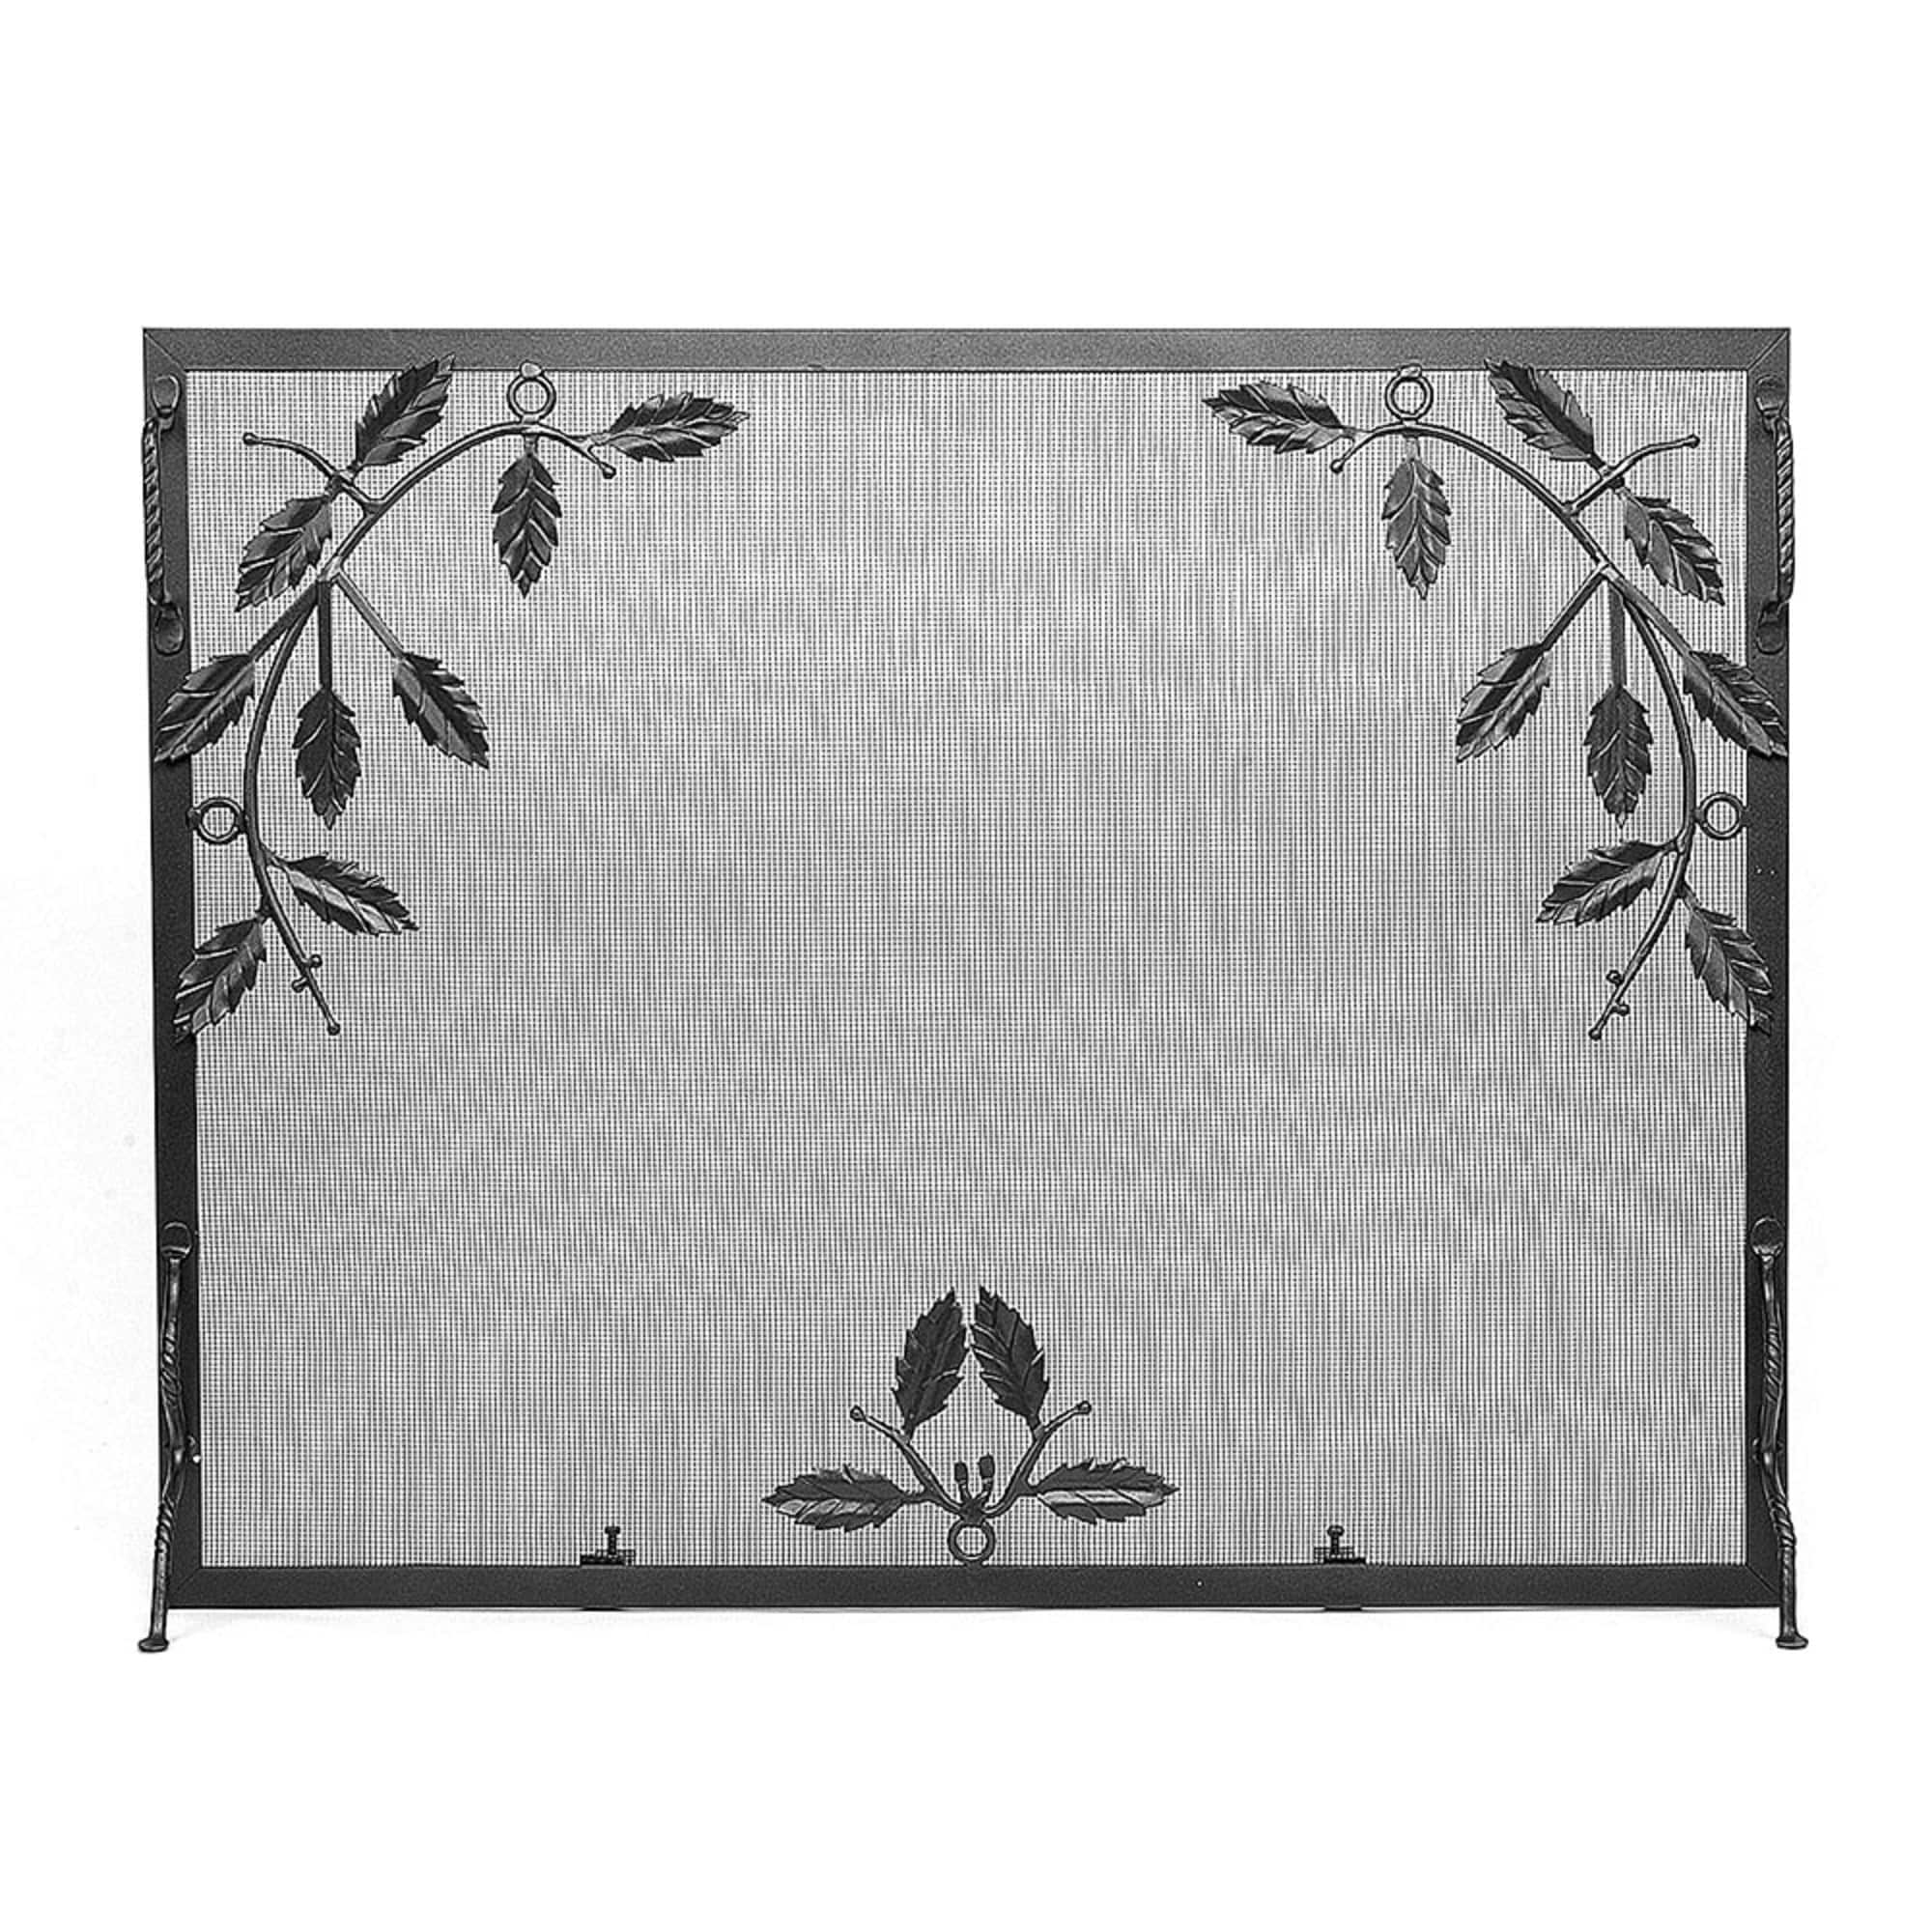 Minuteman International Weston Flat Fireplace Screen withLeaves Design, 38 Inch Long, Graphite Finish